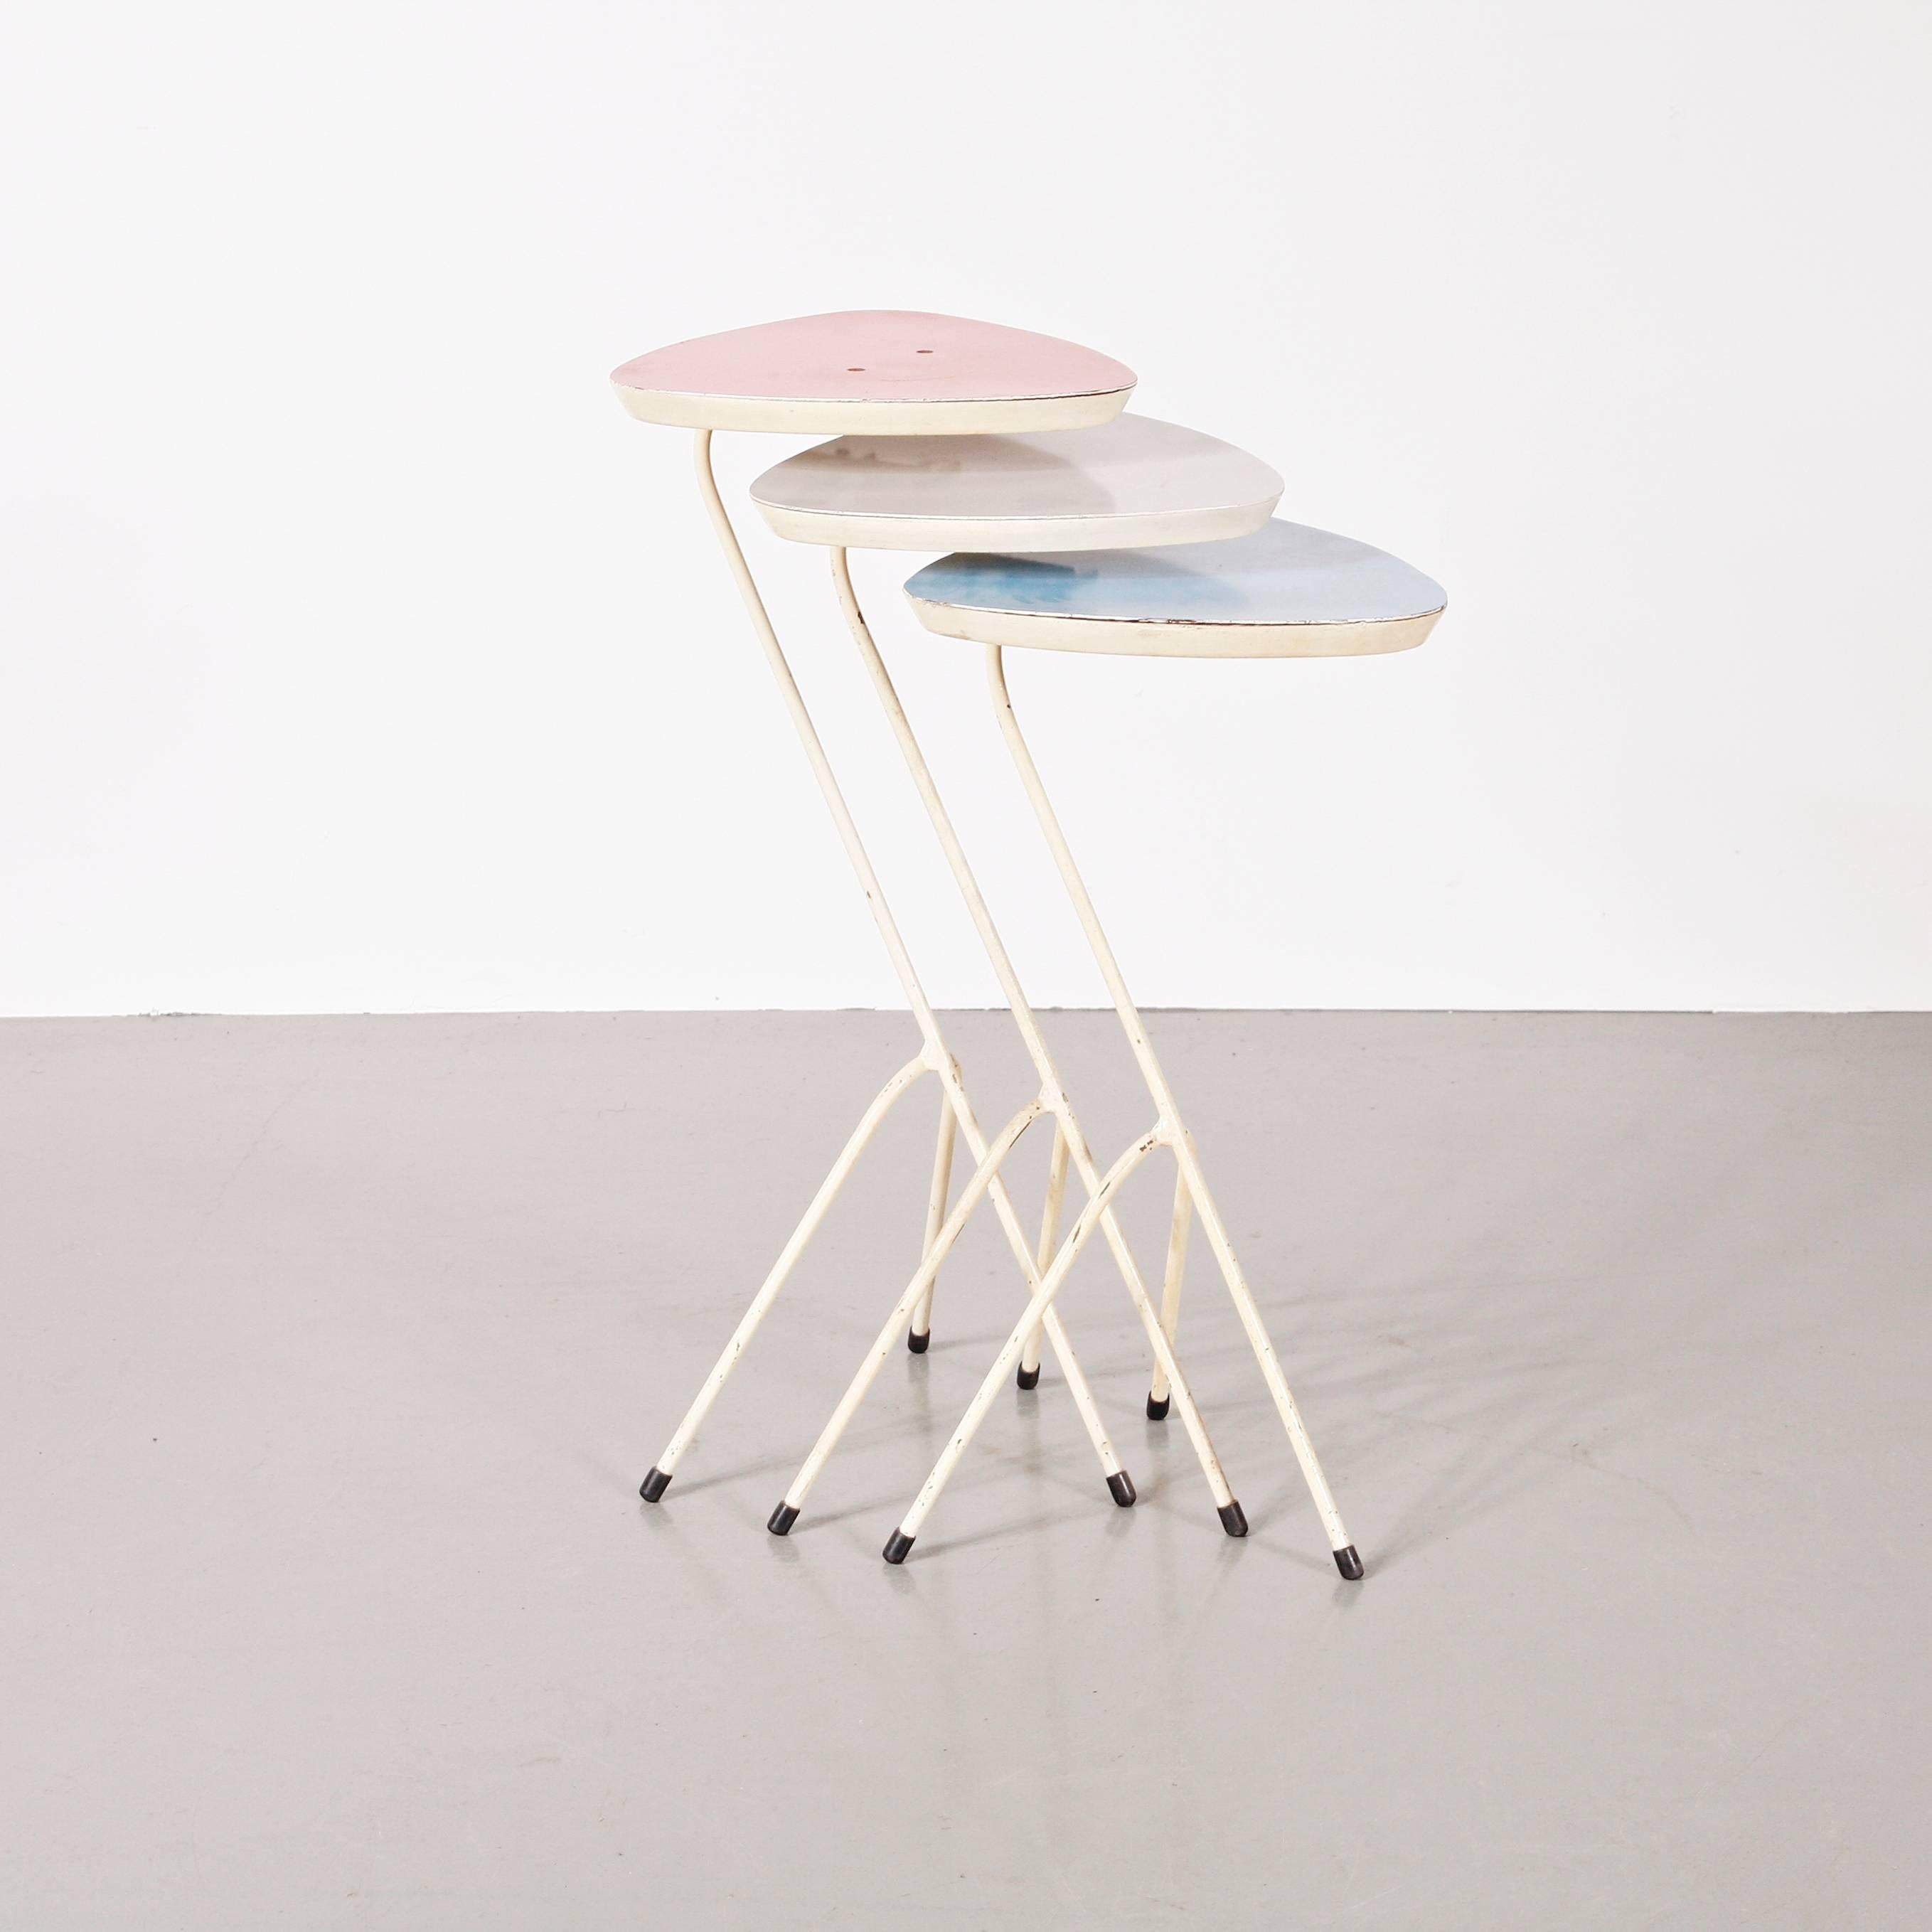 This vintage set of three formica-topped nesting tables was designed during the 1950s by Coen de Vries and produced by Devo in the Netherlands. The tables feature lacquered steel frames, formica table tops in blue, pink and grey. One of the table